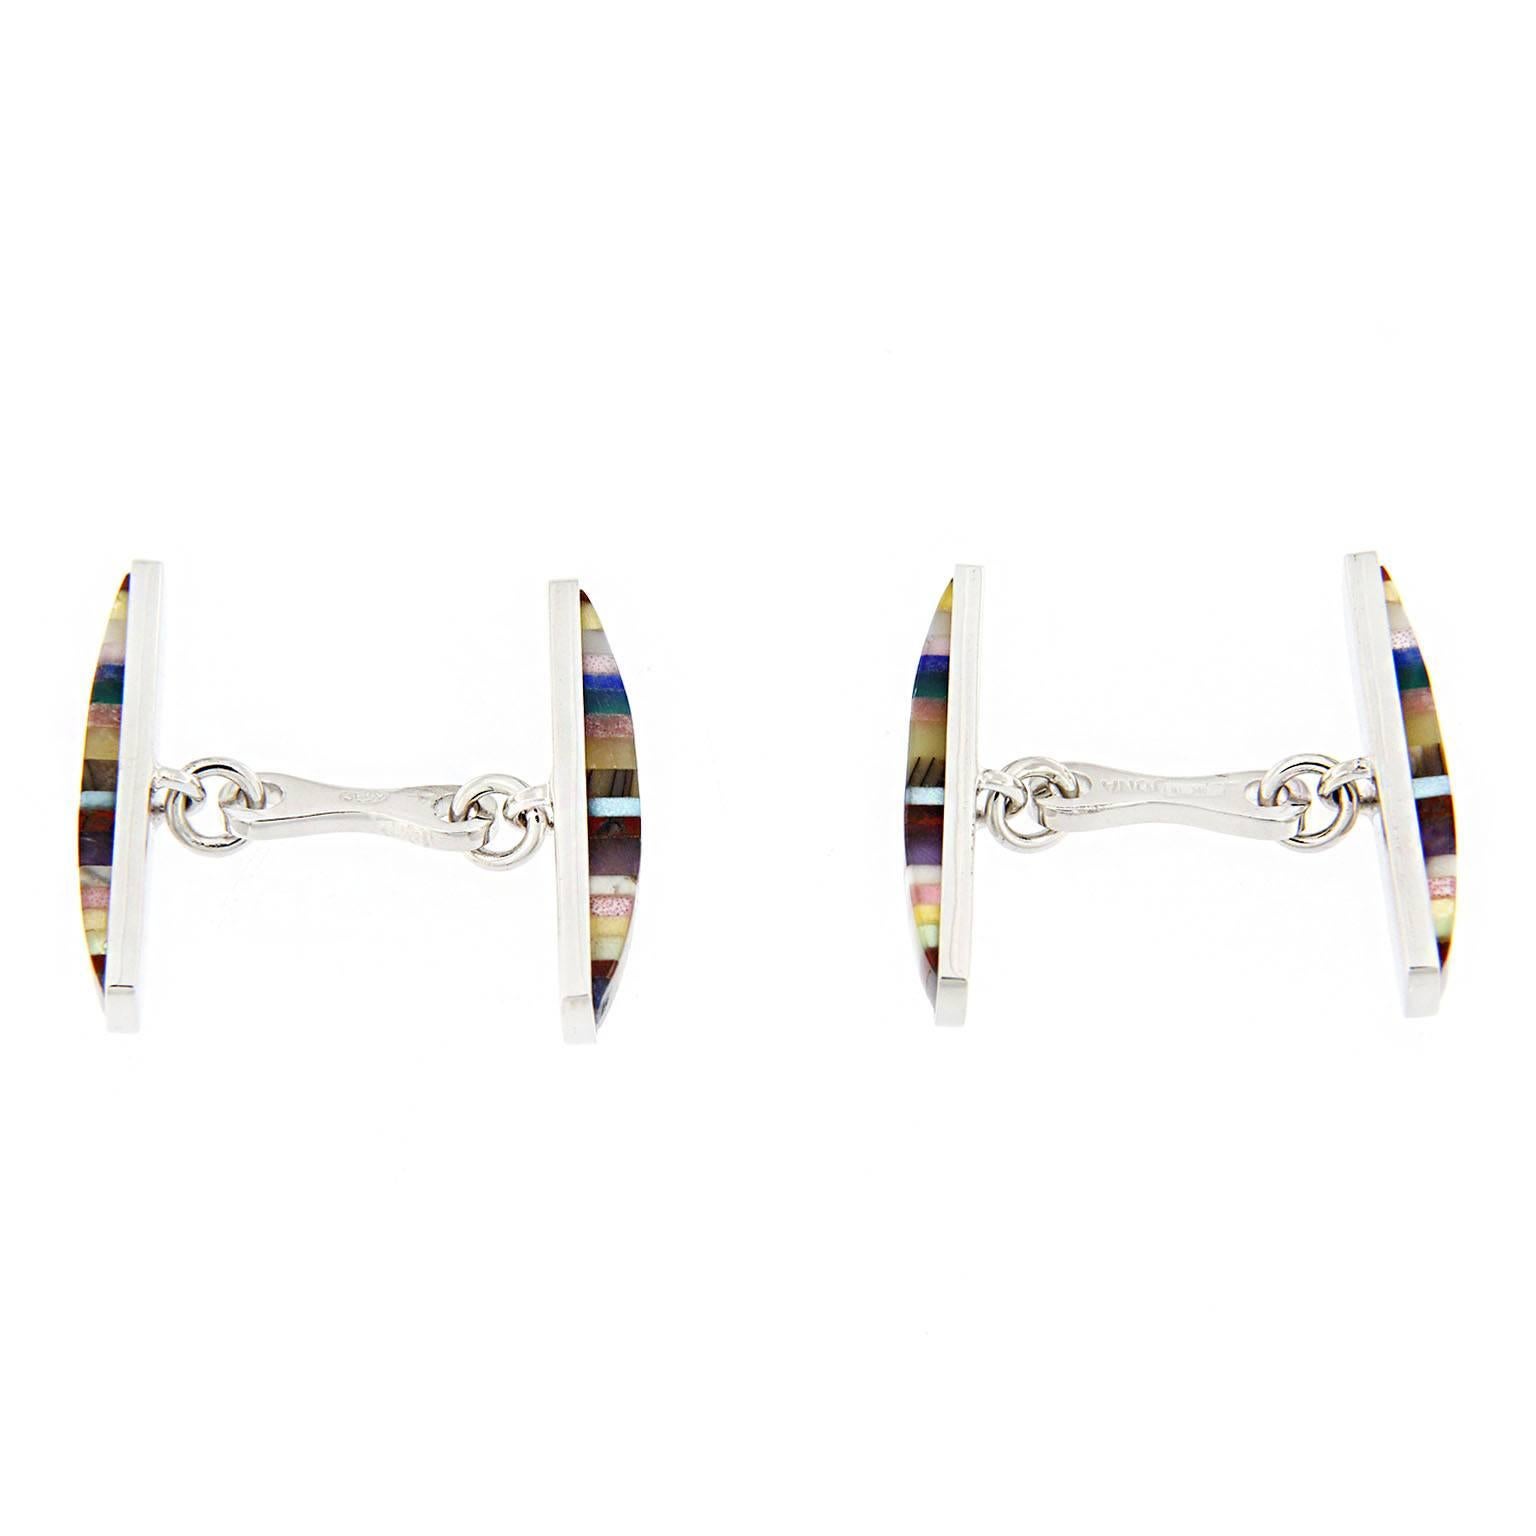 Jona design collection, hand crafted in Italy, rhodium plated sterling silver multiple layered semiprecious stone and mother of pearl cufflinks. 
Marked Jona 925.   
Measurements: 0.23 inch-5.85mm x 0.92inch-23.51mm (each bar).

All Jona jewelry is